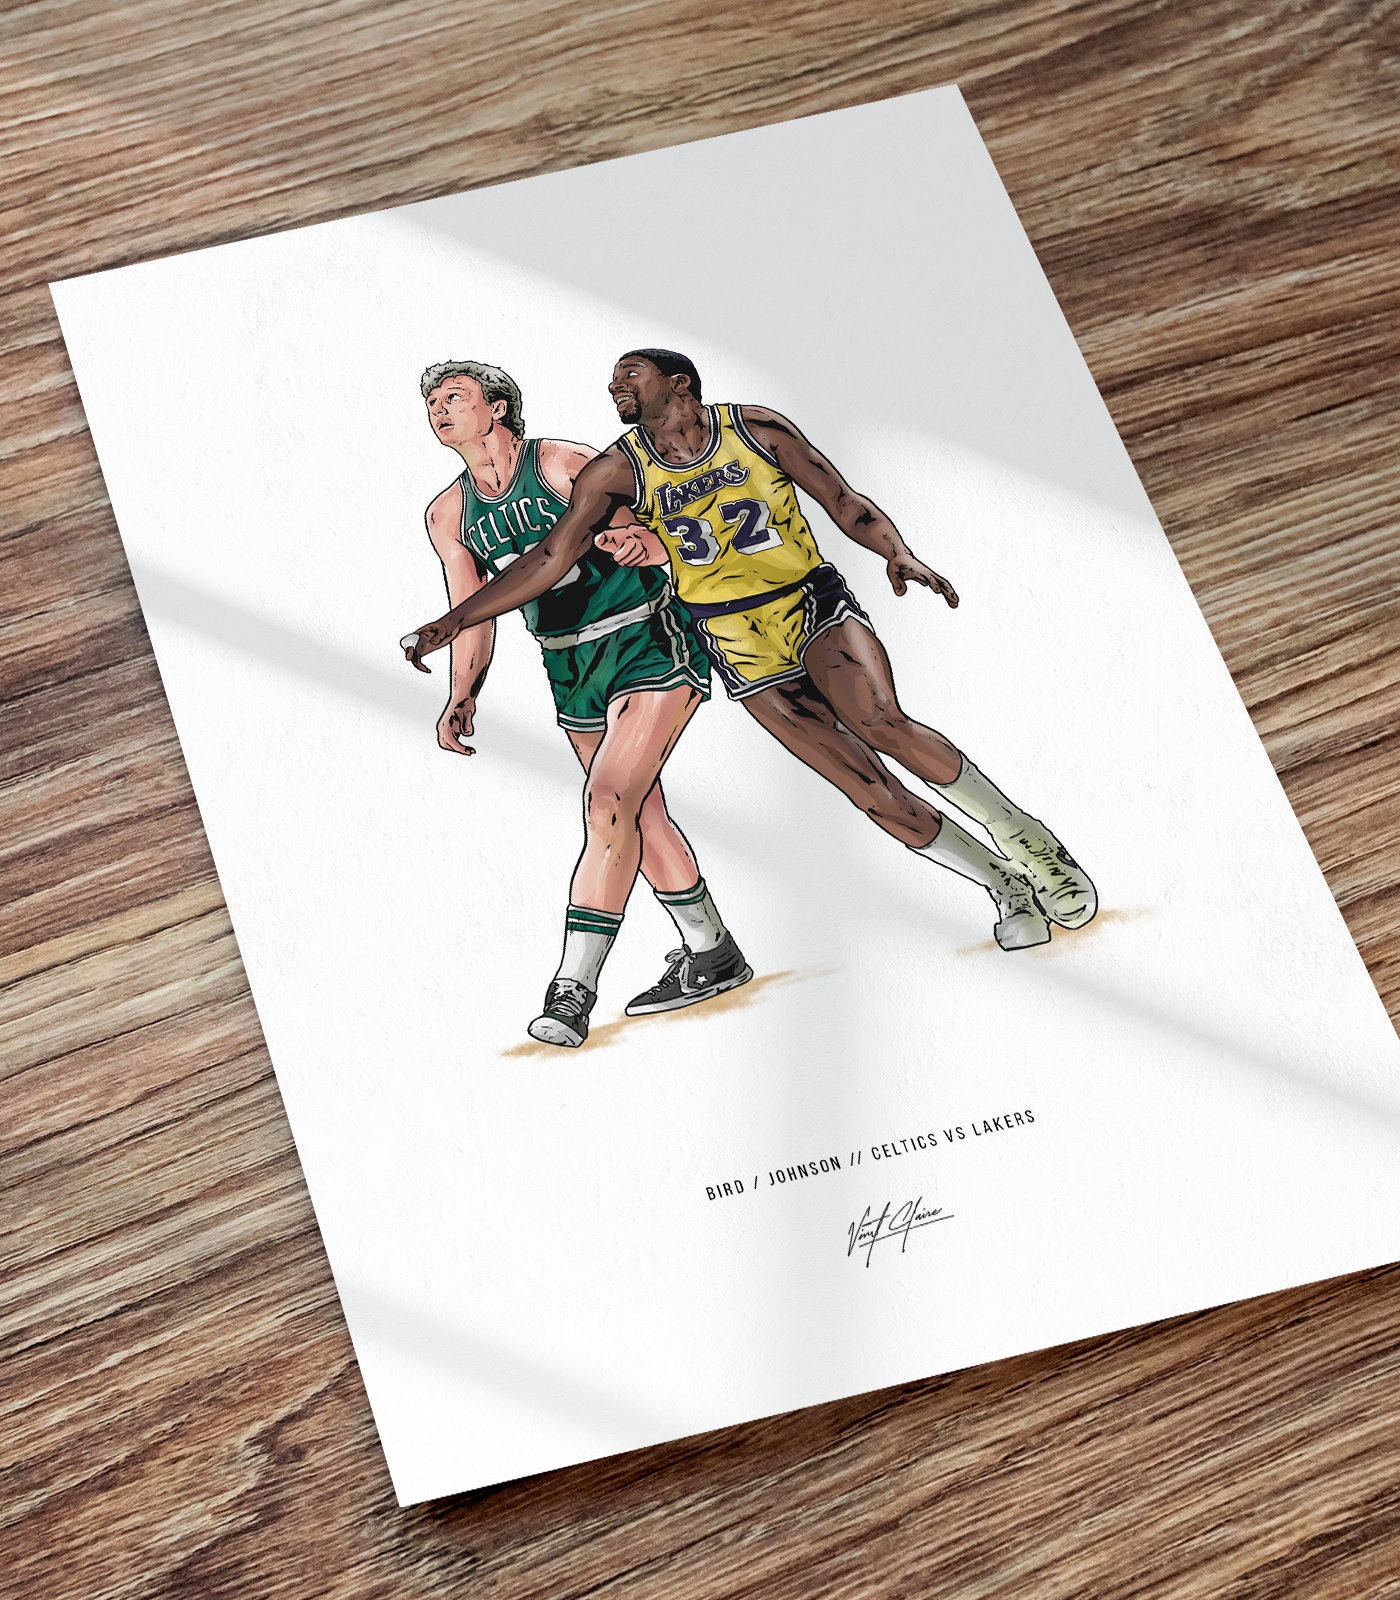 IZS Larry Bird And Magic Johnson Bump Fists Poster Decorative Painting  Canvas Wall Art Living Room Posters Bedroom Painting 16x24inch(40x60cm)